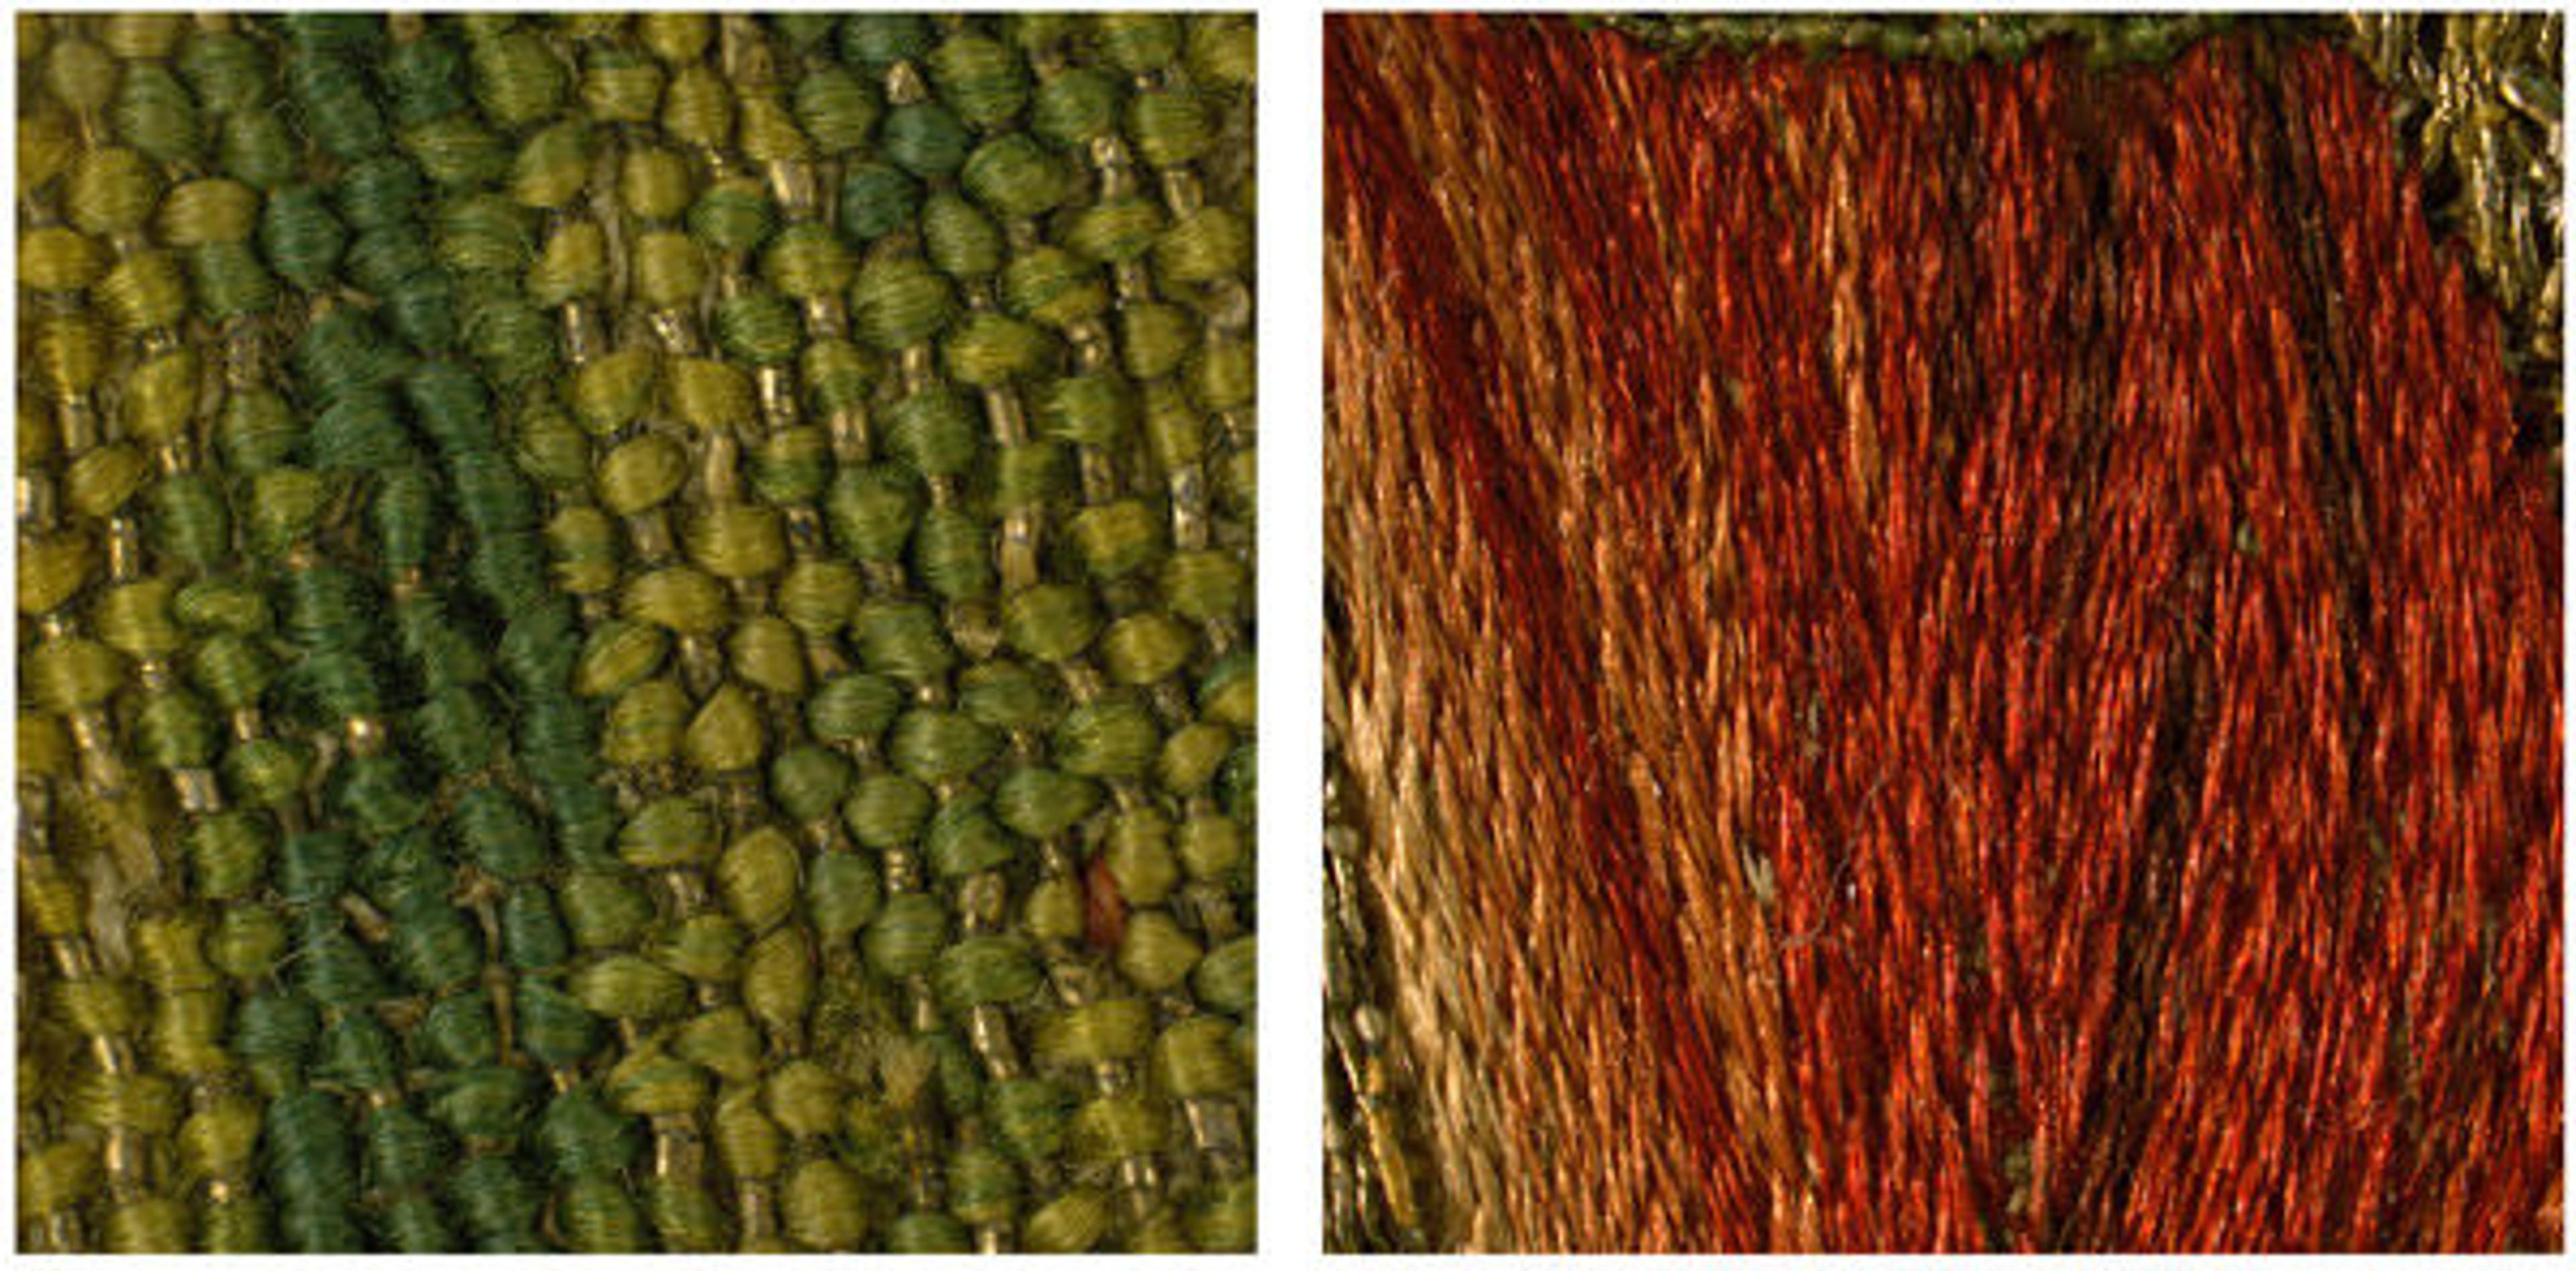 Fig. 5 a, b. Detail of the green- and red-dyed silk stitches (magnified 5x), from Saint Martin Announcing to His Parents That He Will Become a Christian (1975.1.1909) (left) and Saint Martin Brings a Dead Man to Life (1975.1.1906) (right)